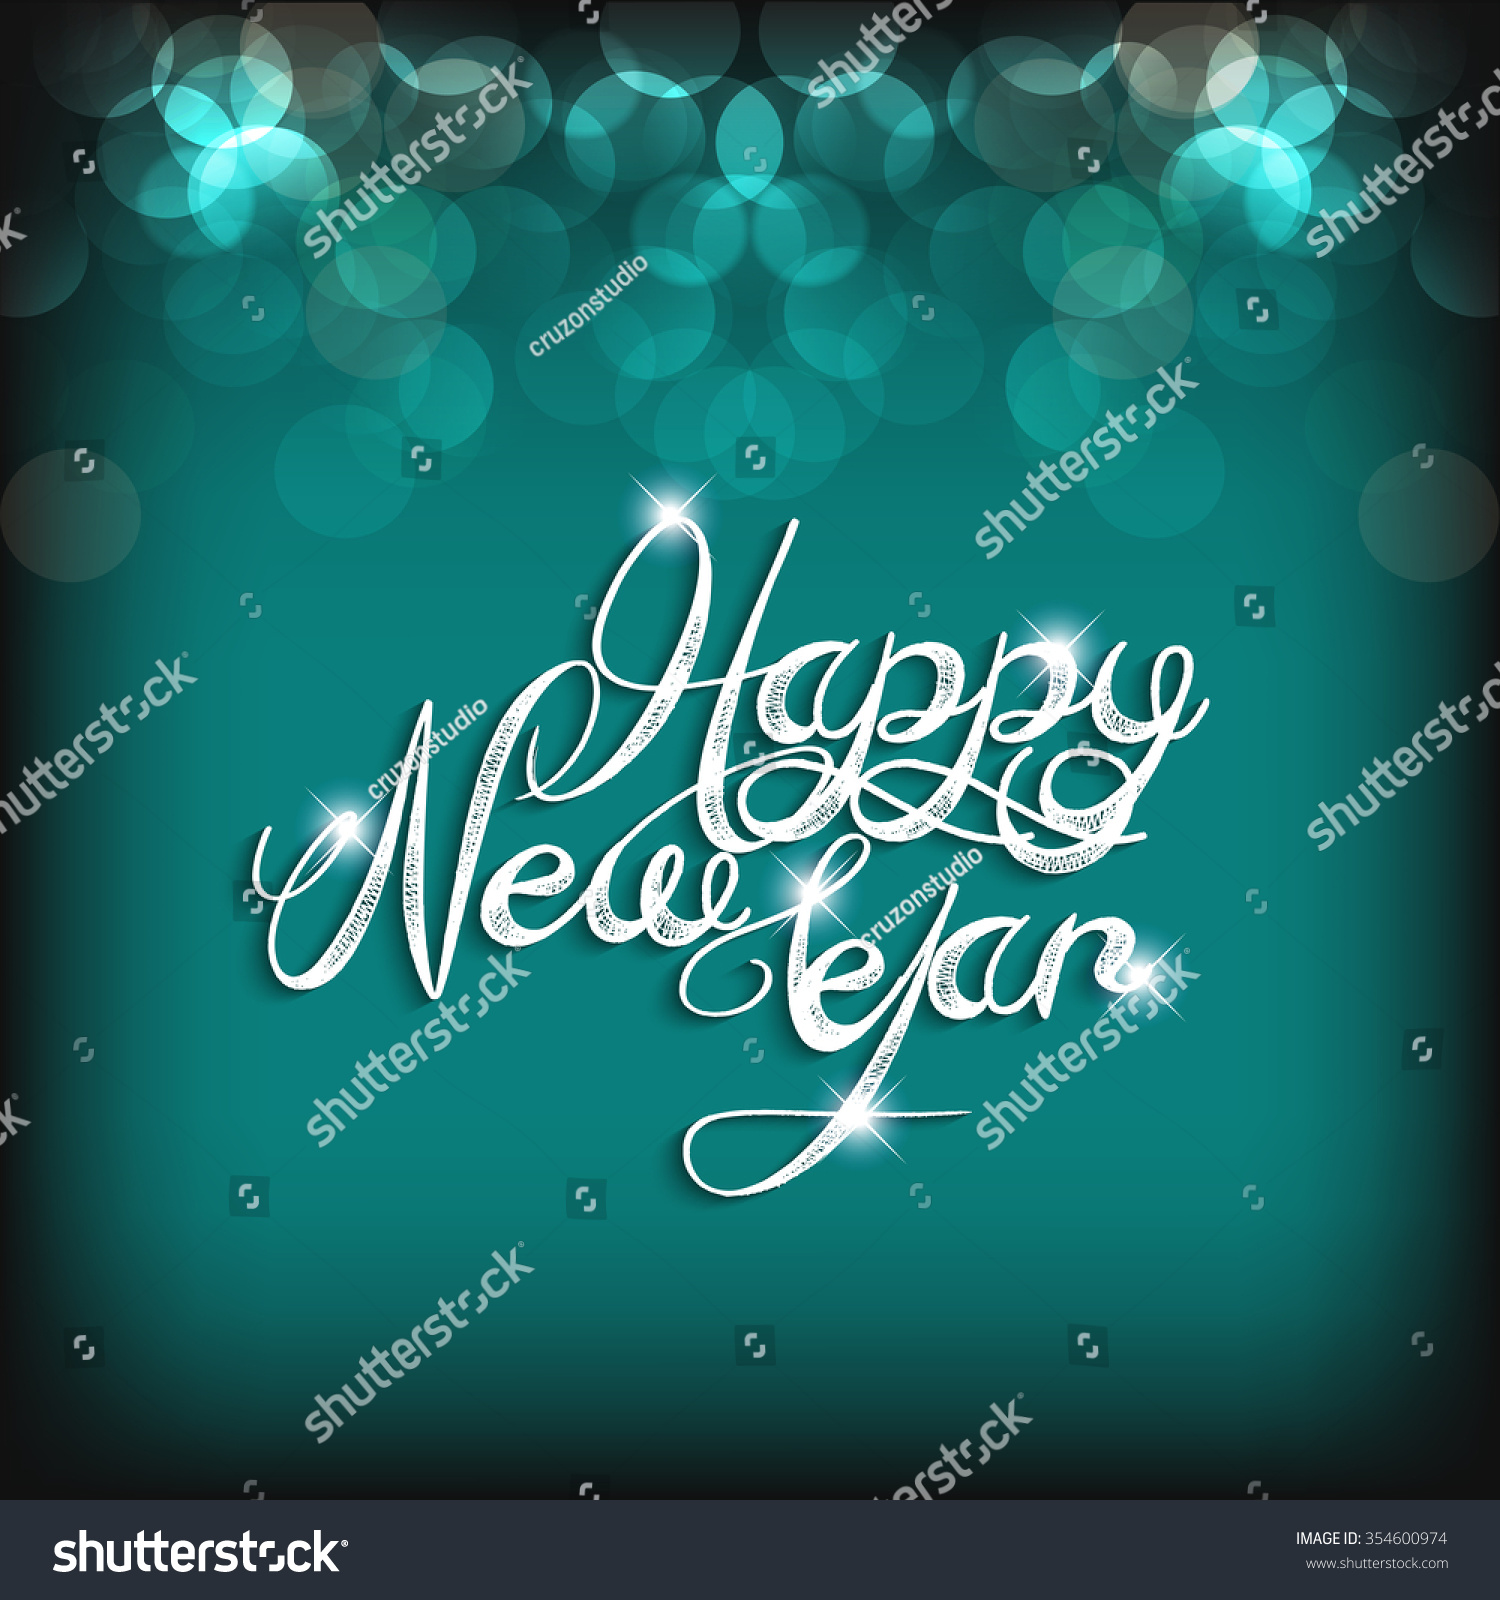 happy new year 2016, greeting or illustration with beautiful text for new year 2016. #354600974